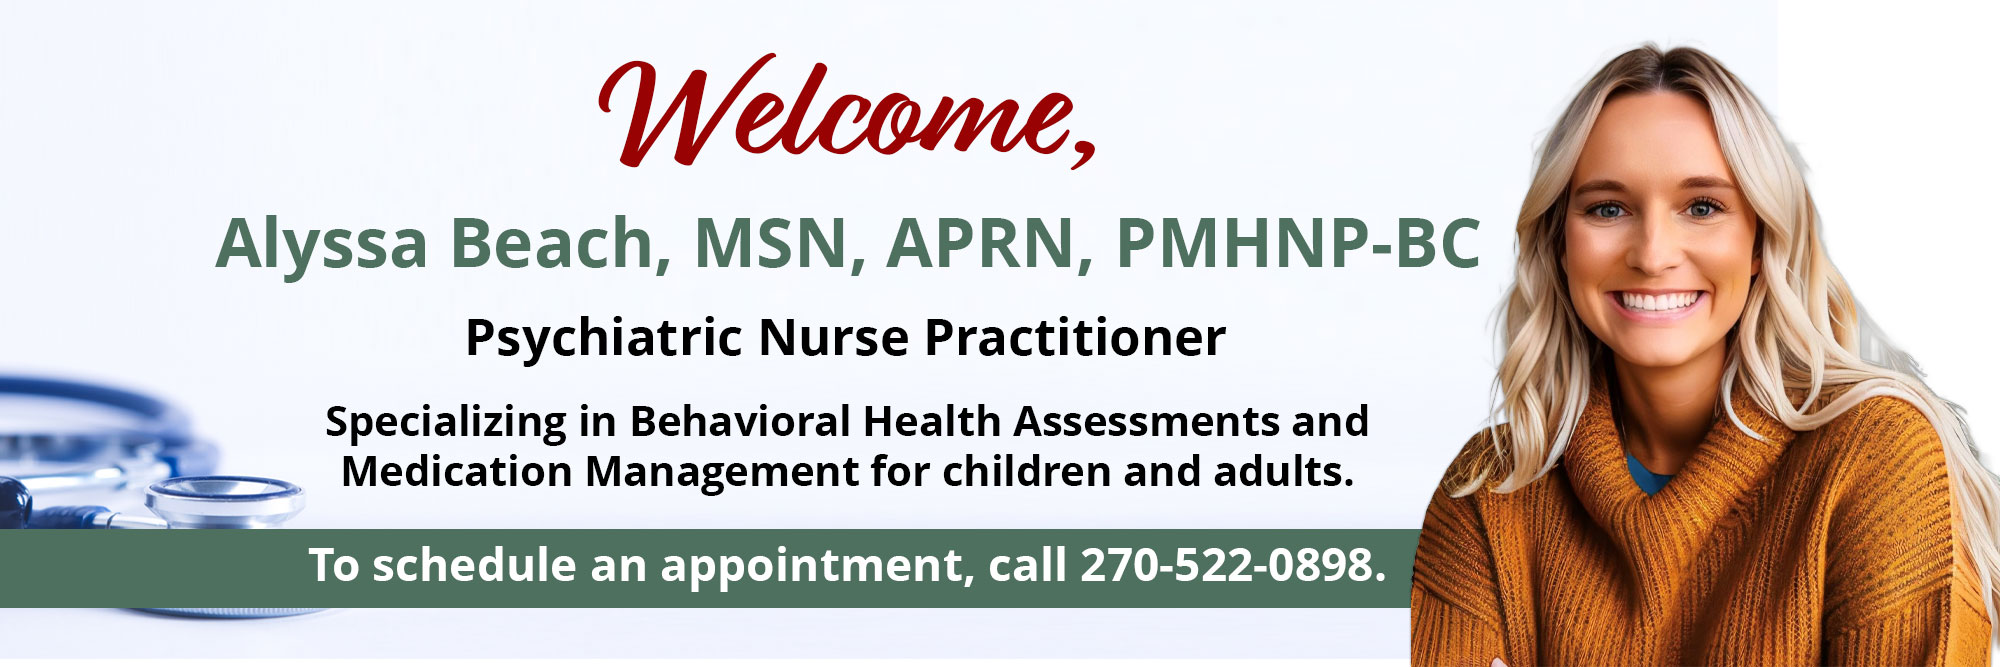 Welcome Alyssa Beach, MSN, APRN, PMHNP-BC

Psychiatric Nurse Practitioner

Specializing in Behavioral Health Assessments and 
Medication Management for children and adults. 

To schedule an appointment, call 270-522-0898.